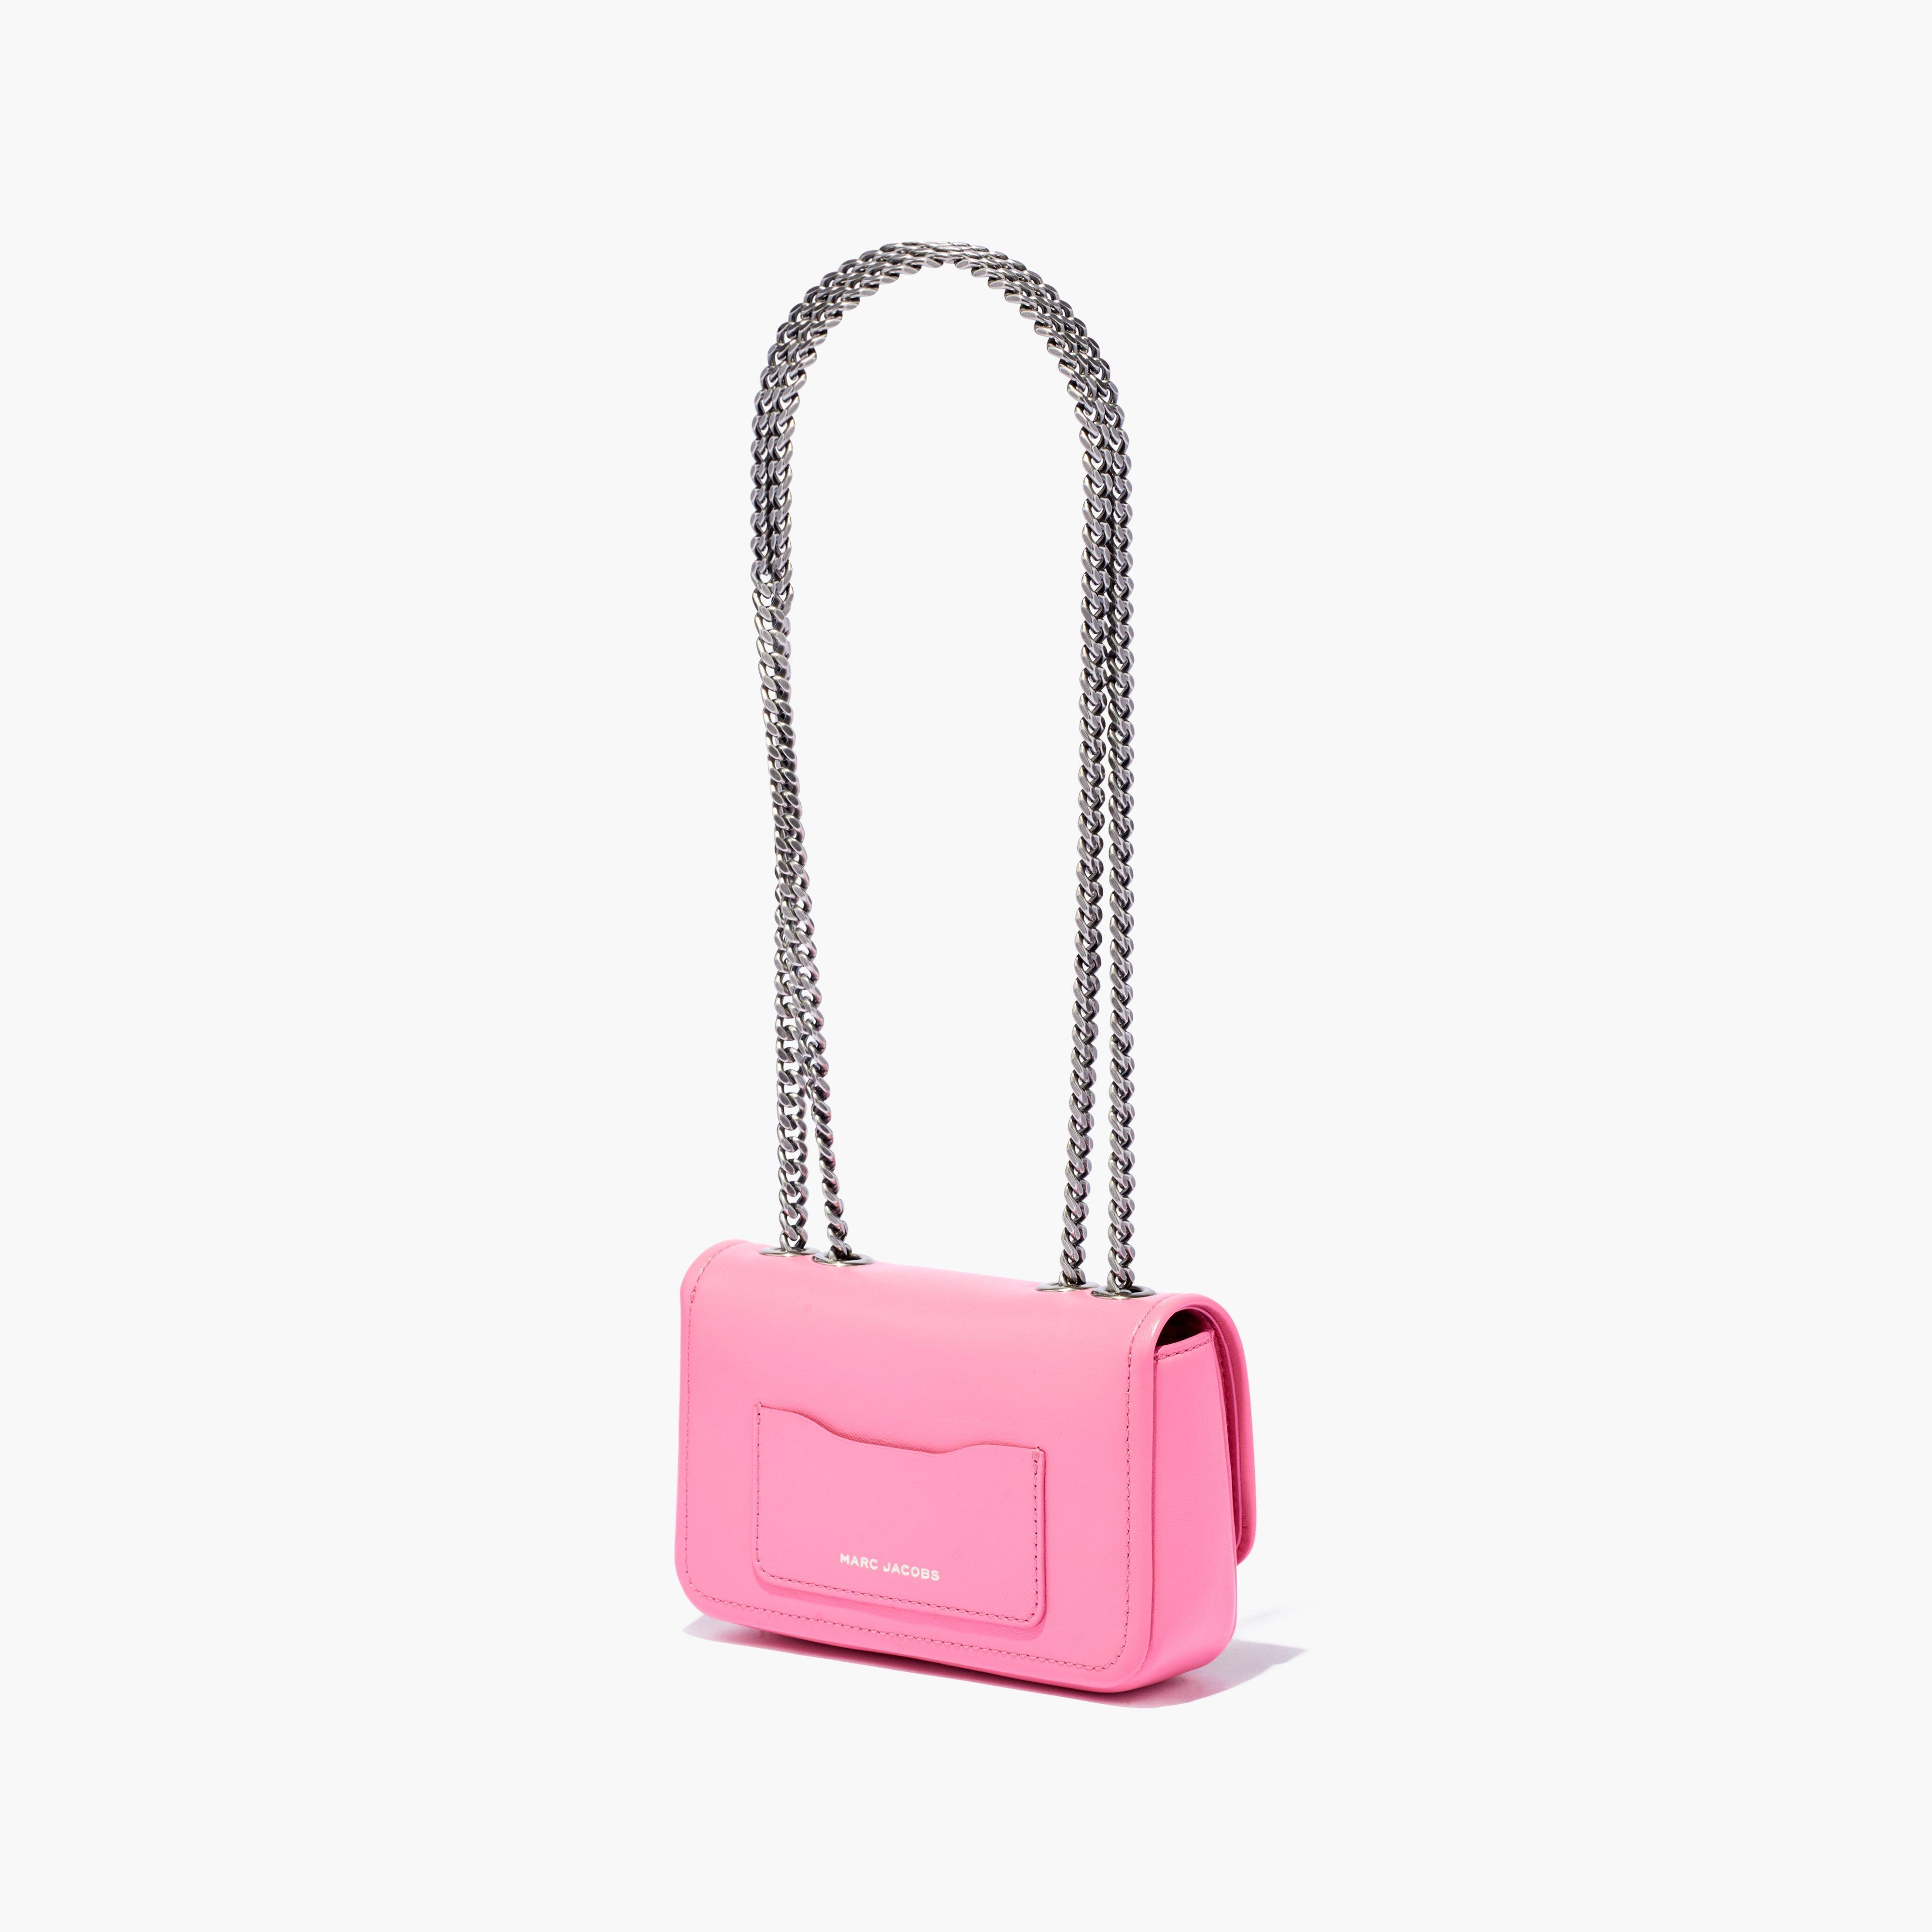 Marc Jacobs Women's The Mini Leather Tote Bag - Morning Glory